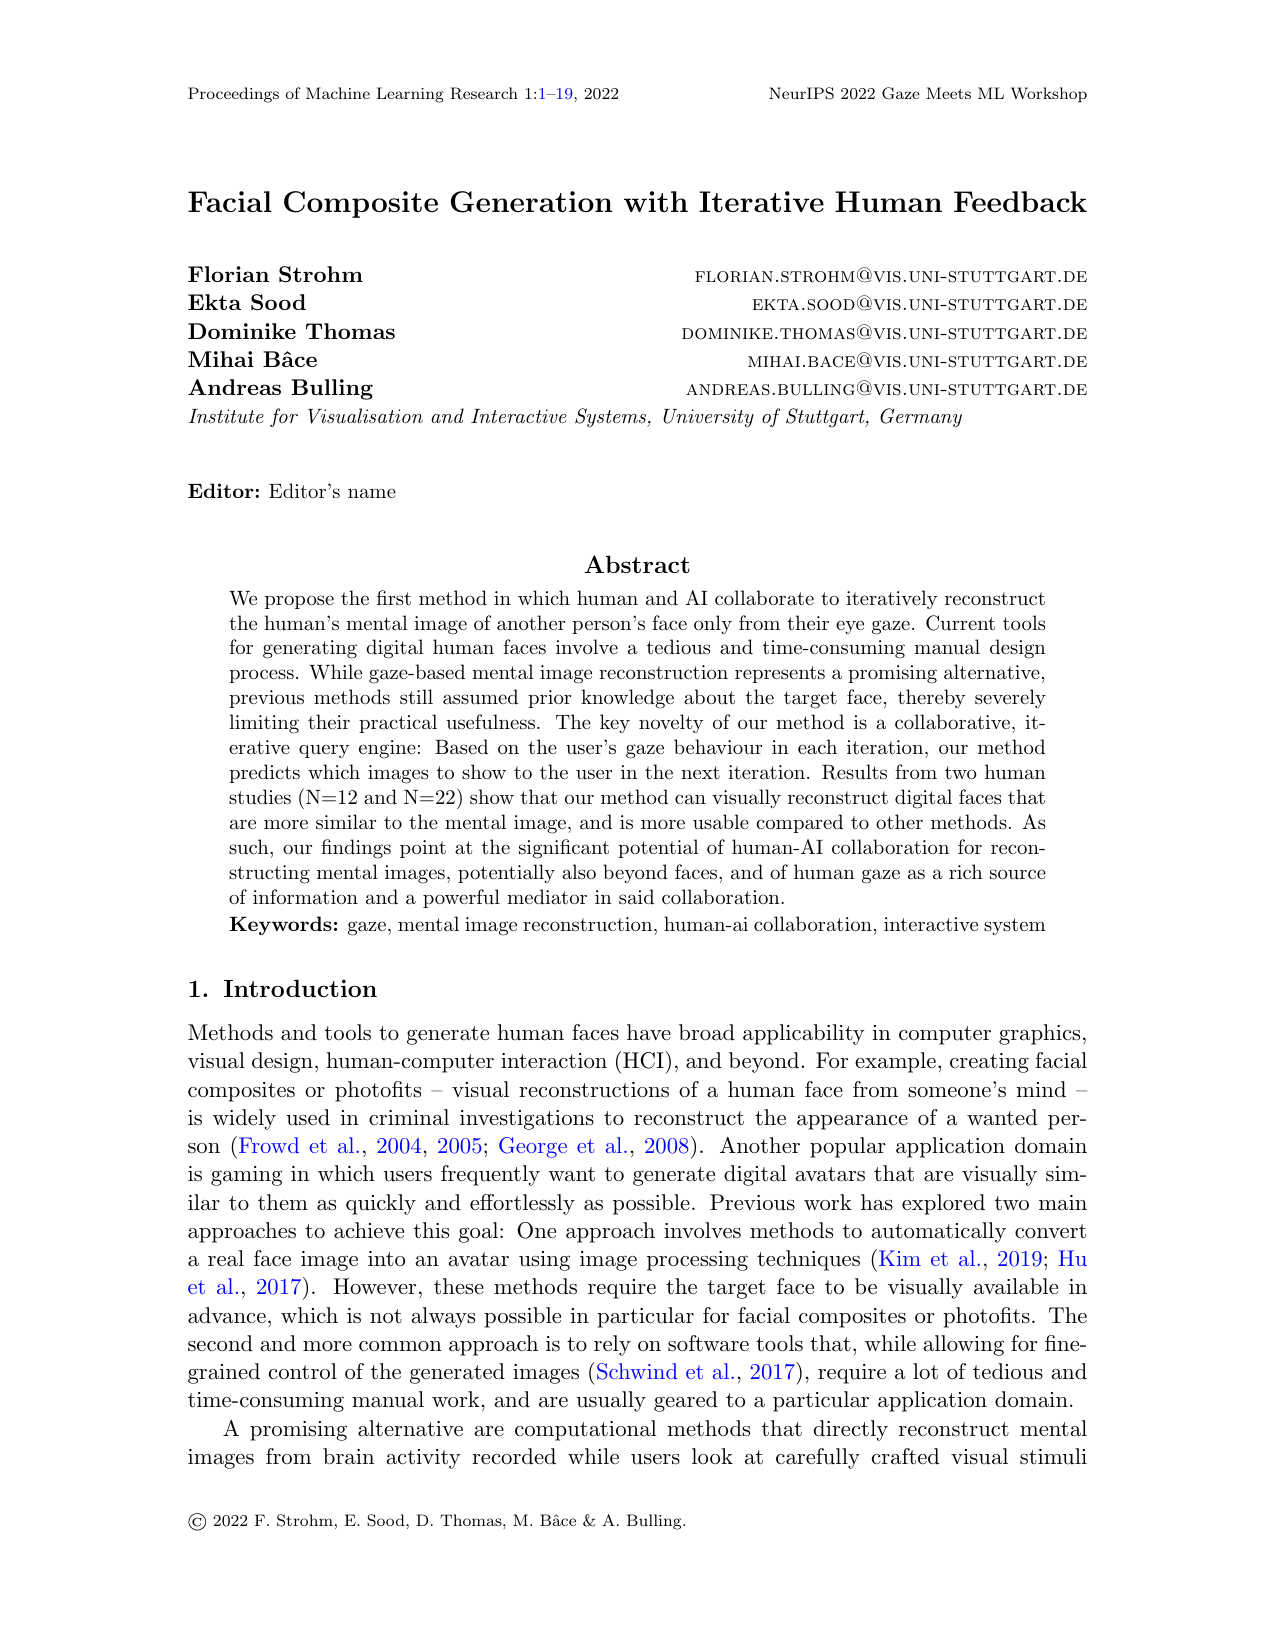 Facial Composite Generation with Iterative Human Feedback